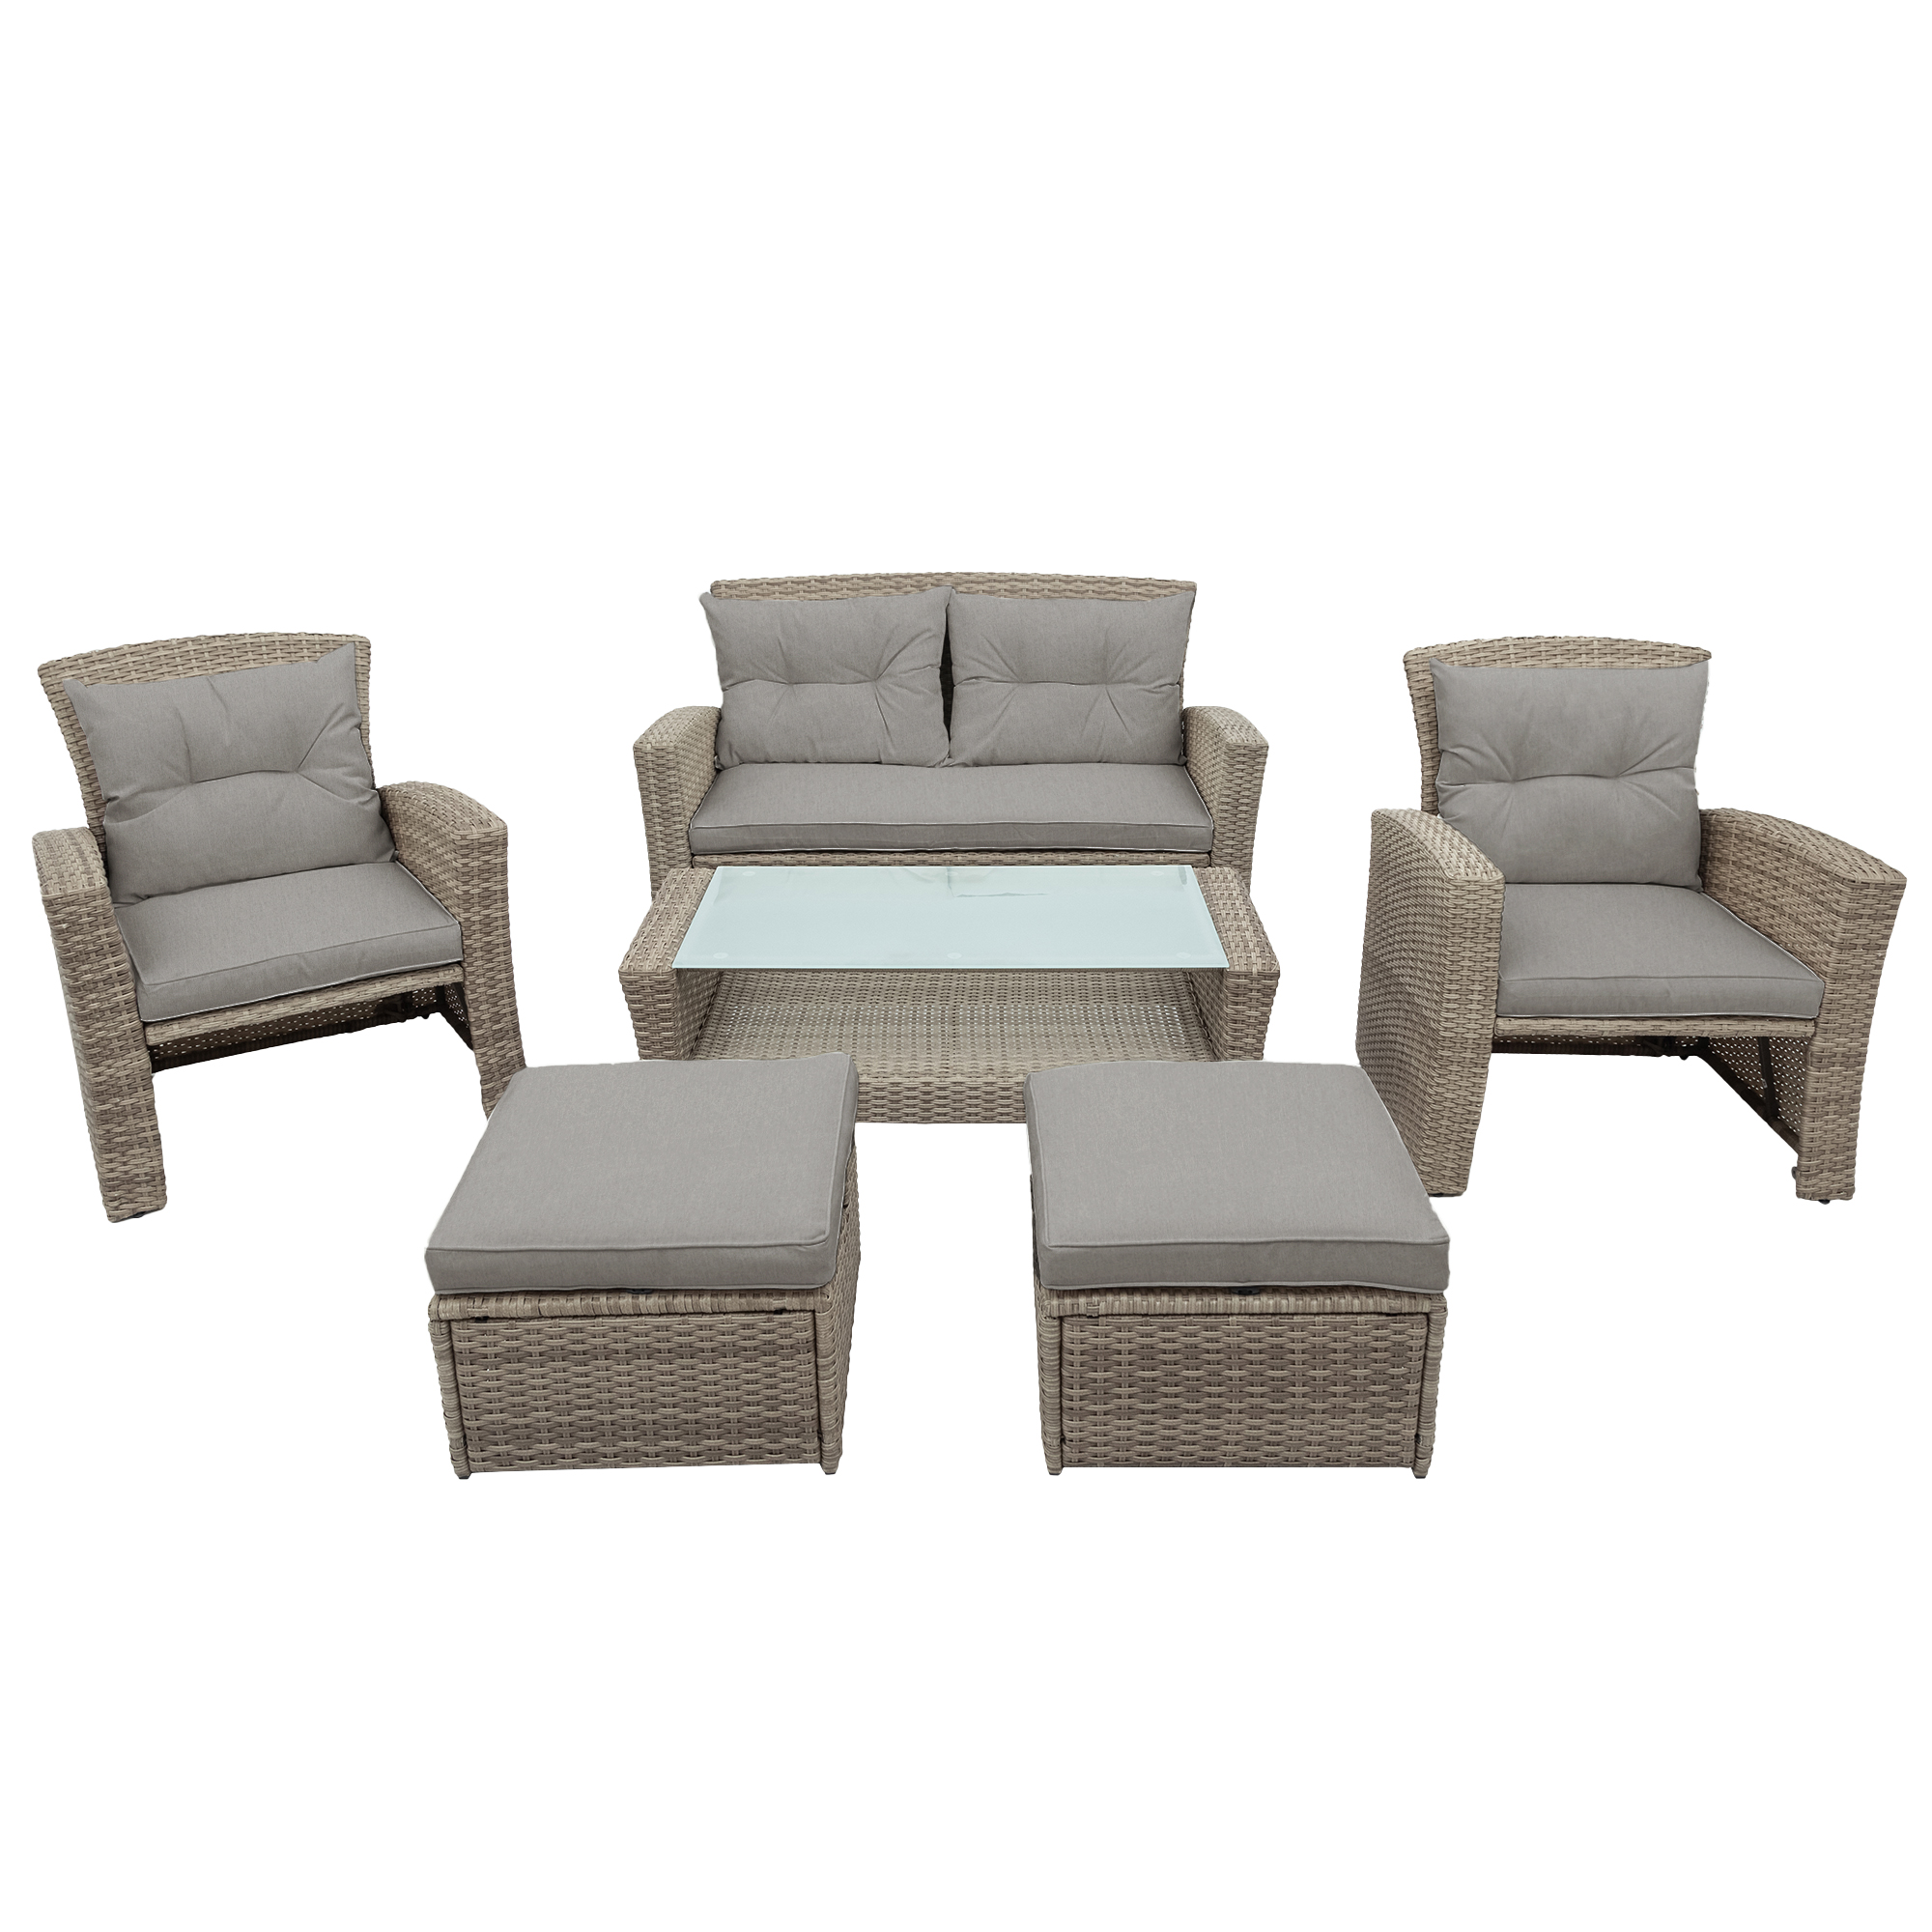 uhomepro Outdoor Patio Furniture Set, 6-Piece PE Rattan Wicker Patio Set with Ottomans and Cushions, Outdoor Conversation Sets with Glass Coffee Table, Porch Patio Bistro Set, Q14472 - image 3 of 12